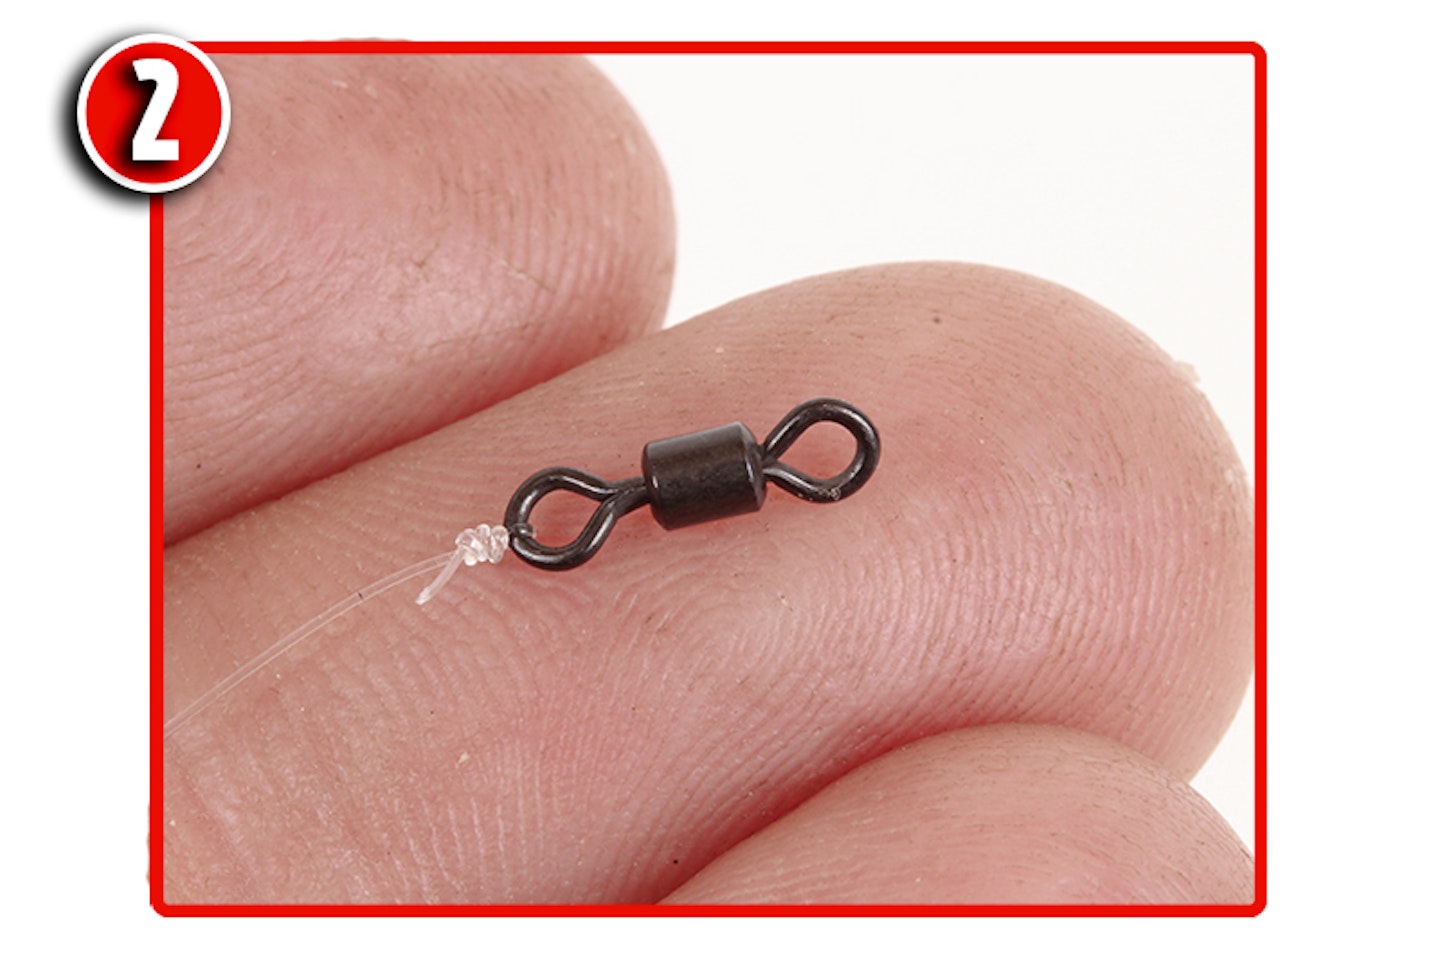 At the other end of the hooklength attach a mini swivel using a four-turn grinner knot. The hooklength should be around 4in long 